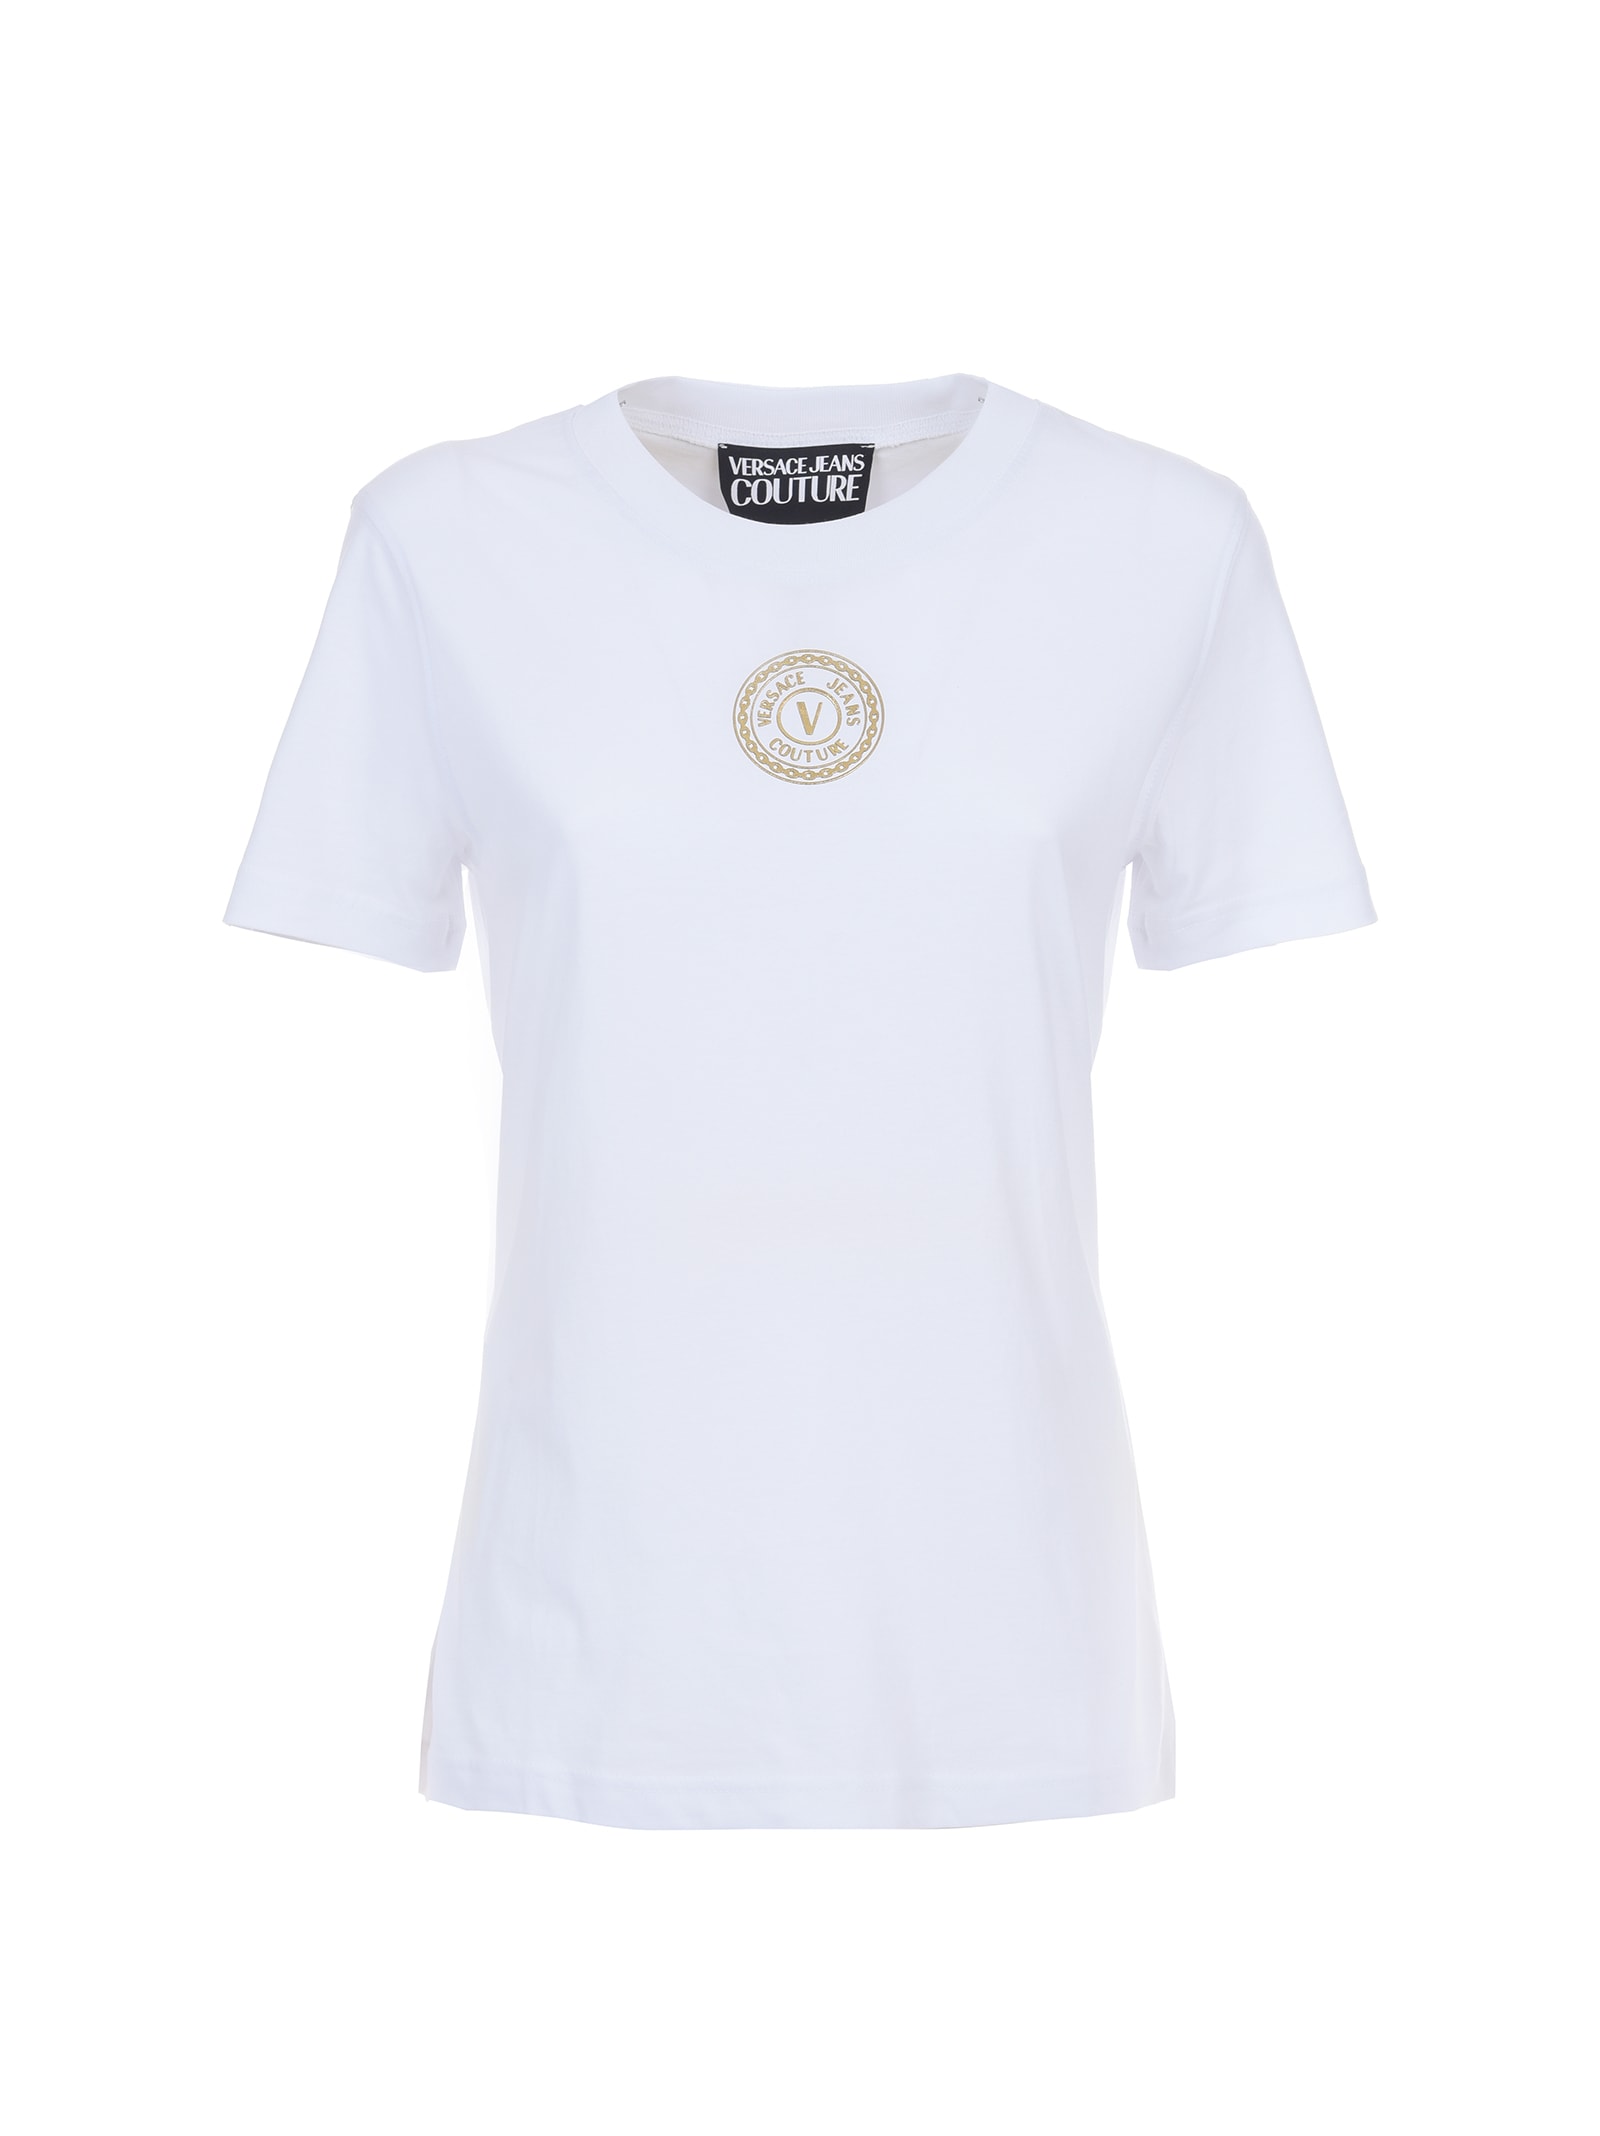 Versace Jeans Couture White T-shirt With Small Emblem Gold Logo